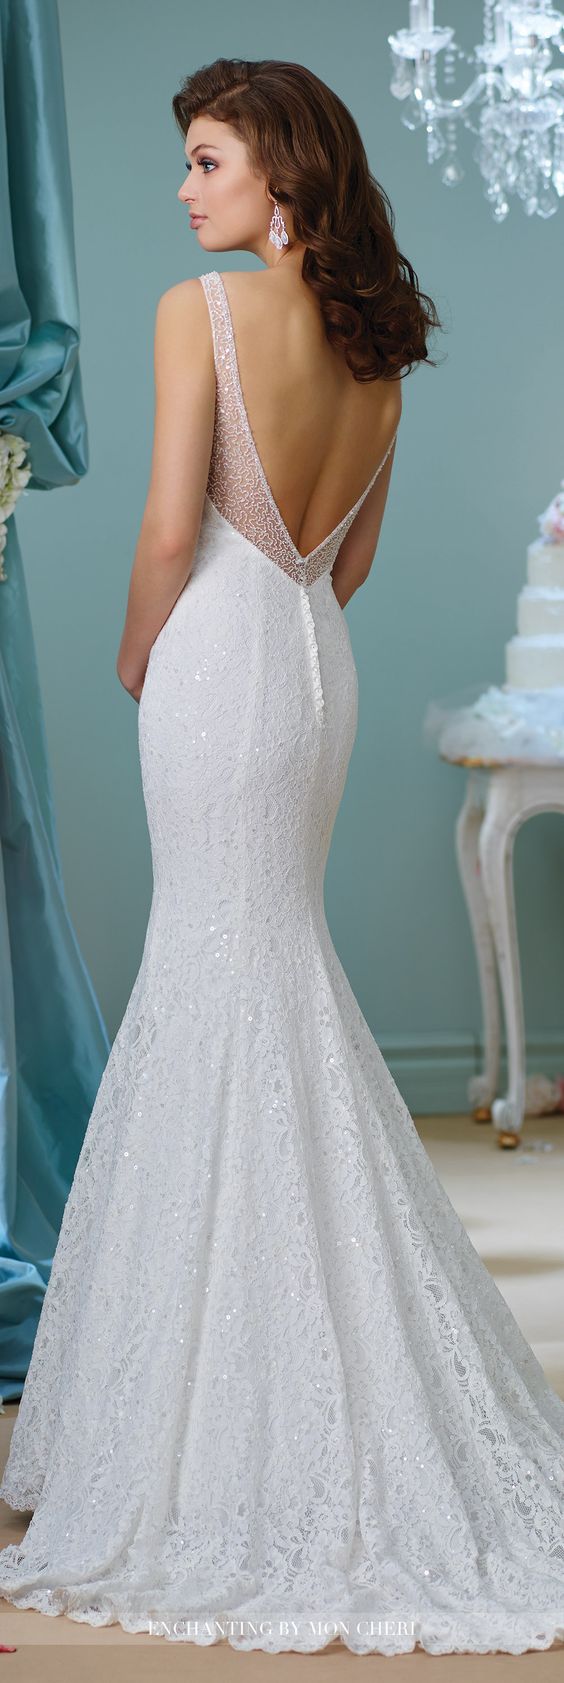 100 Open Back Wedding Dresses with Beautiful Details – Page 7 – Hi Miss ...